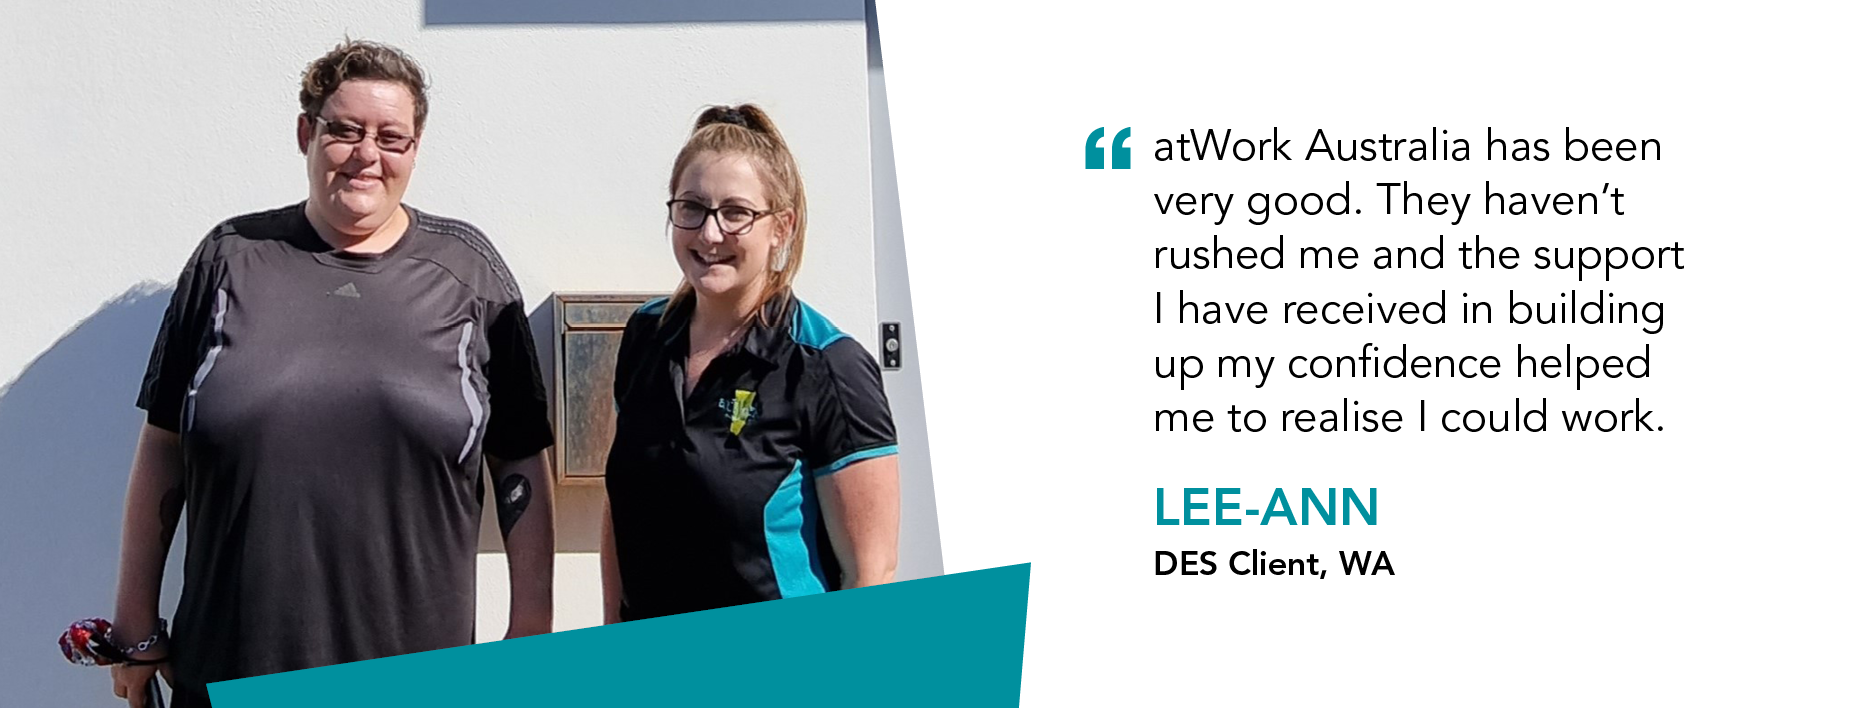 “atWork Australia has been very good. They haven’t rushed me and the support I have received in building up my confidence helped me to realise I could work” – Lee-Ann, DES Client, WA